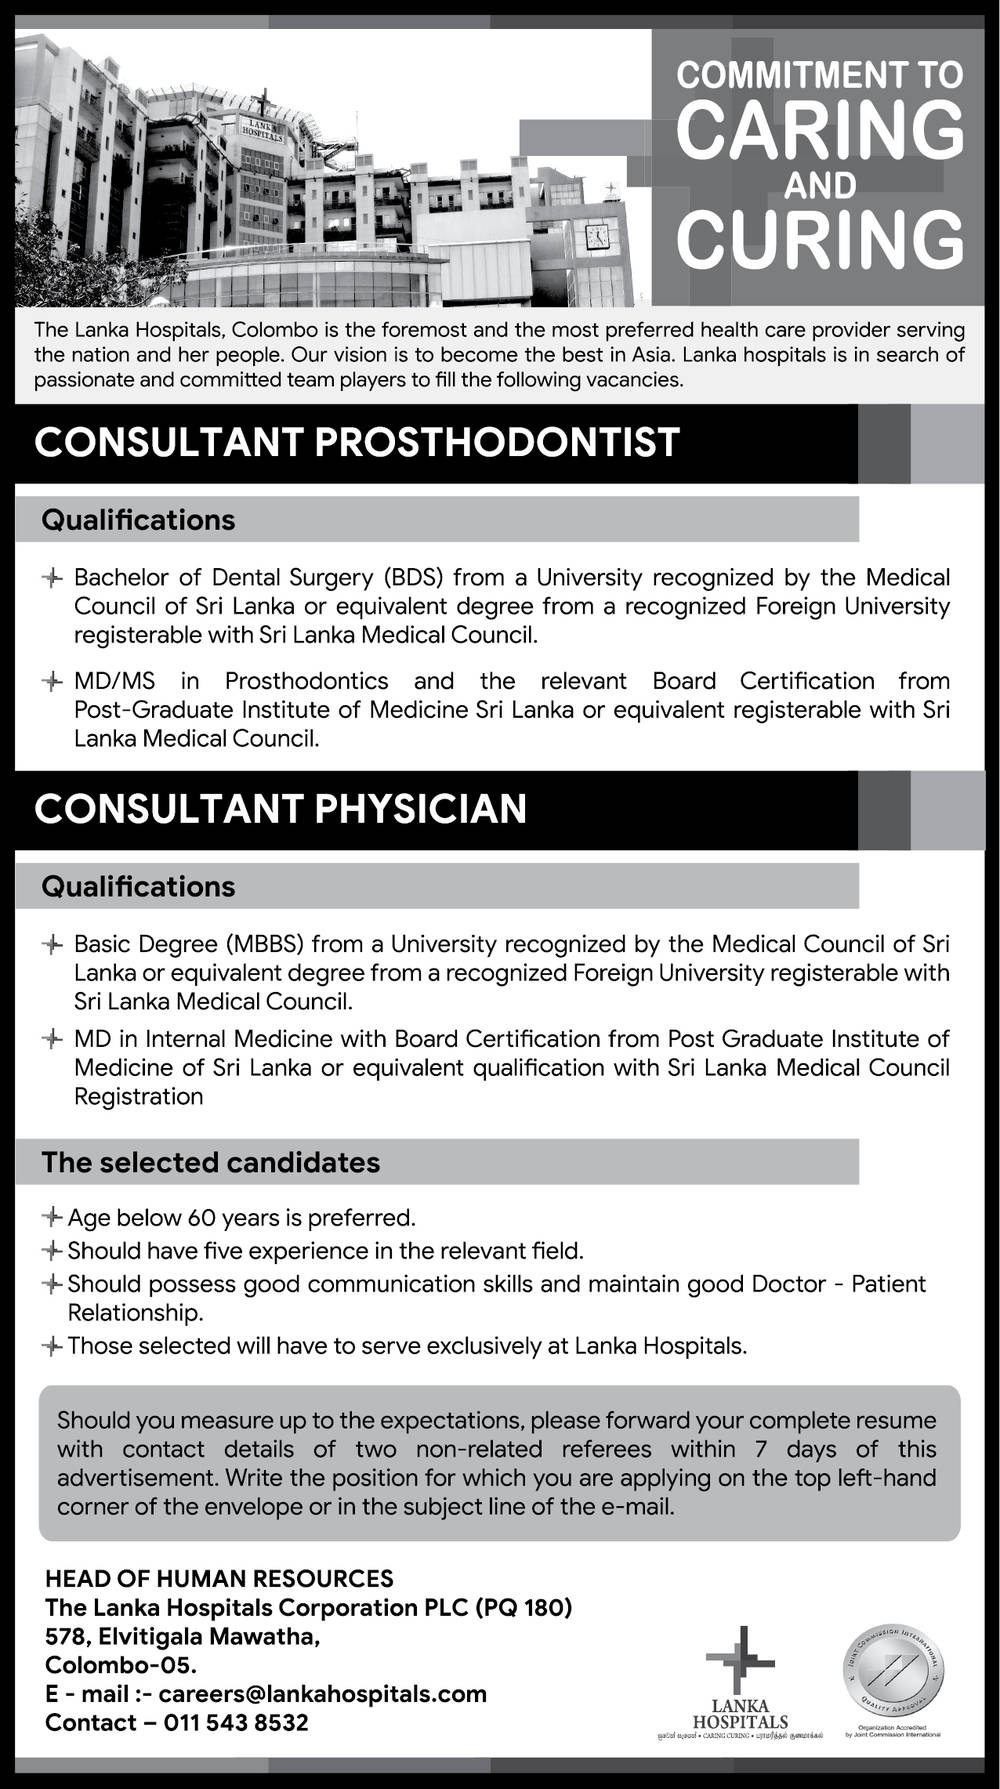 You are currently viewing Consultant Prosthodontist / Consultant Physician